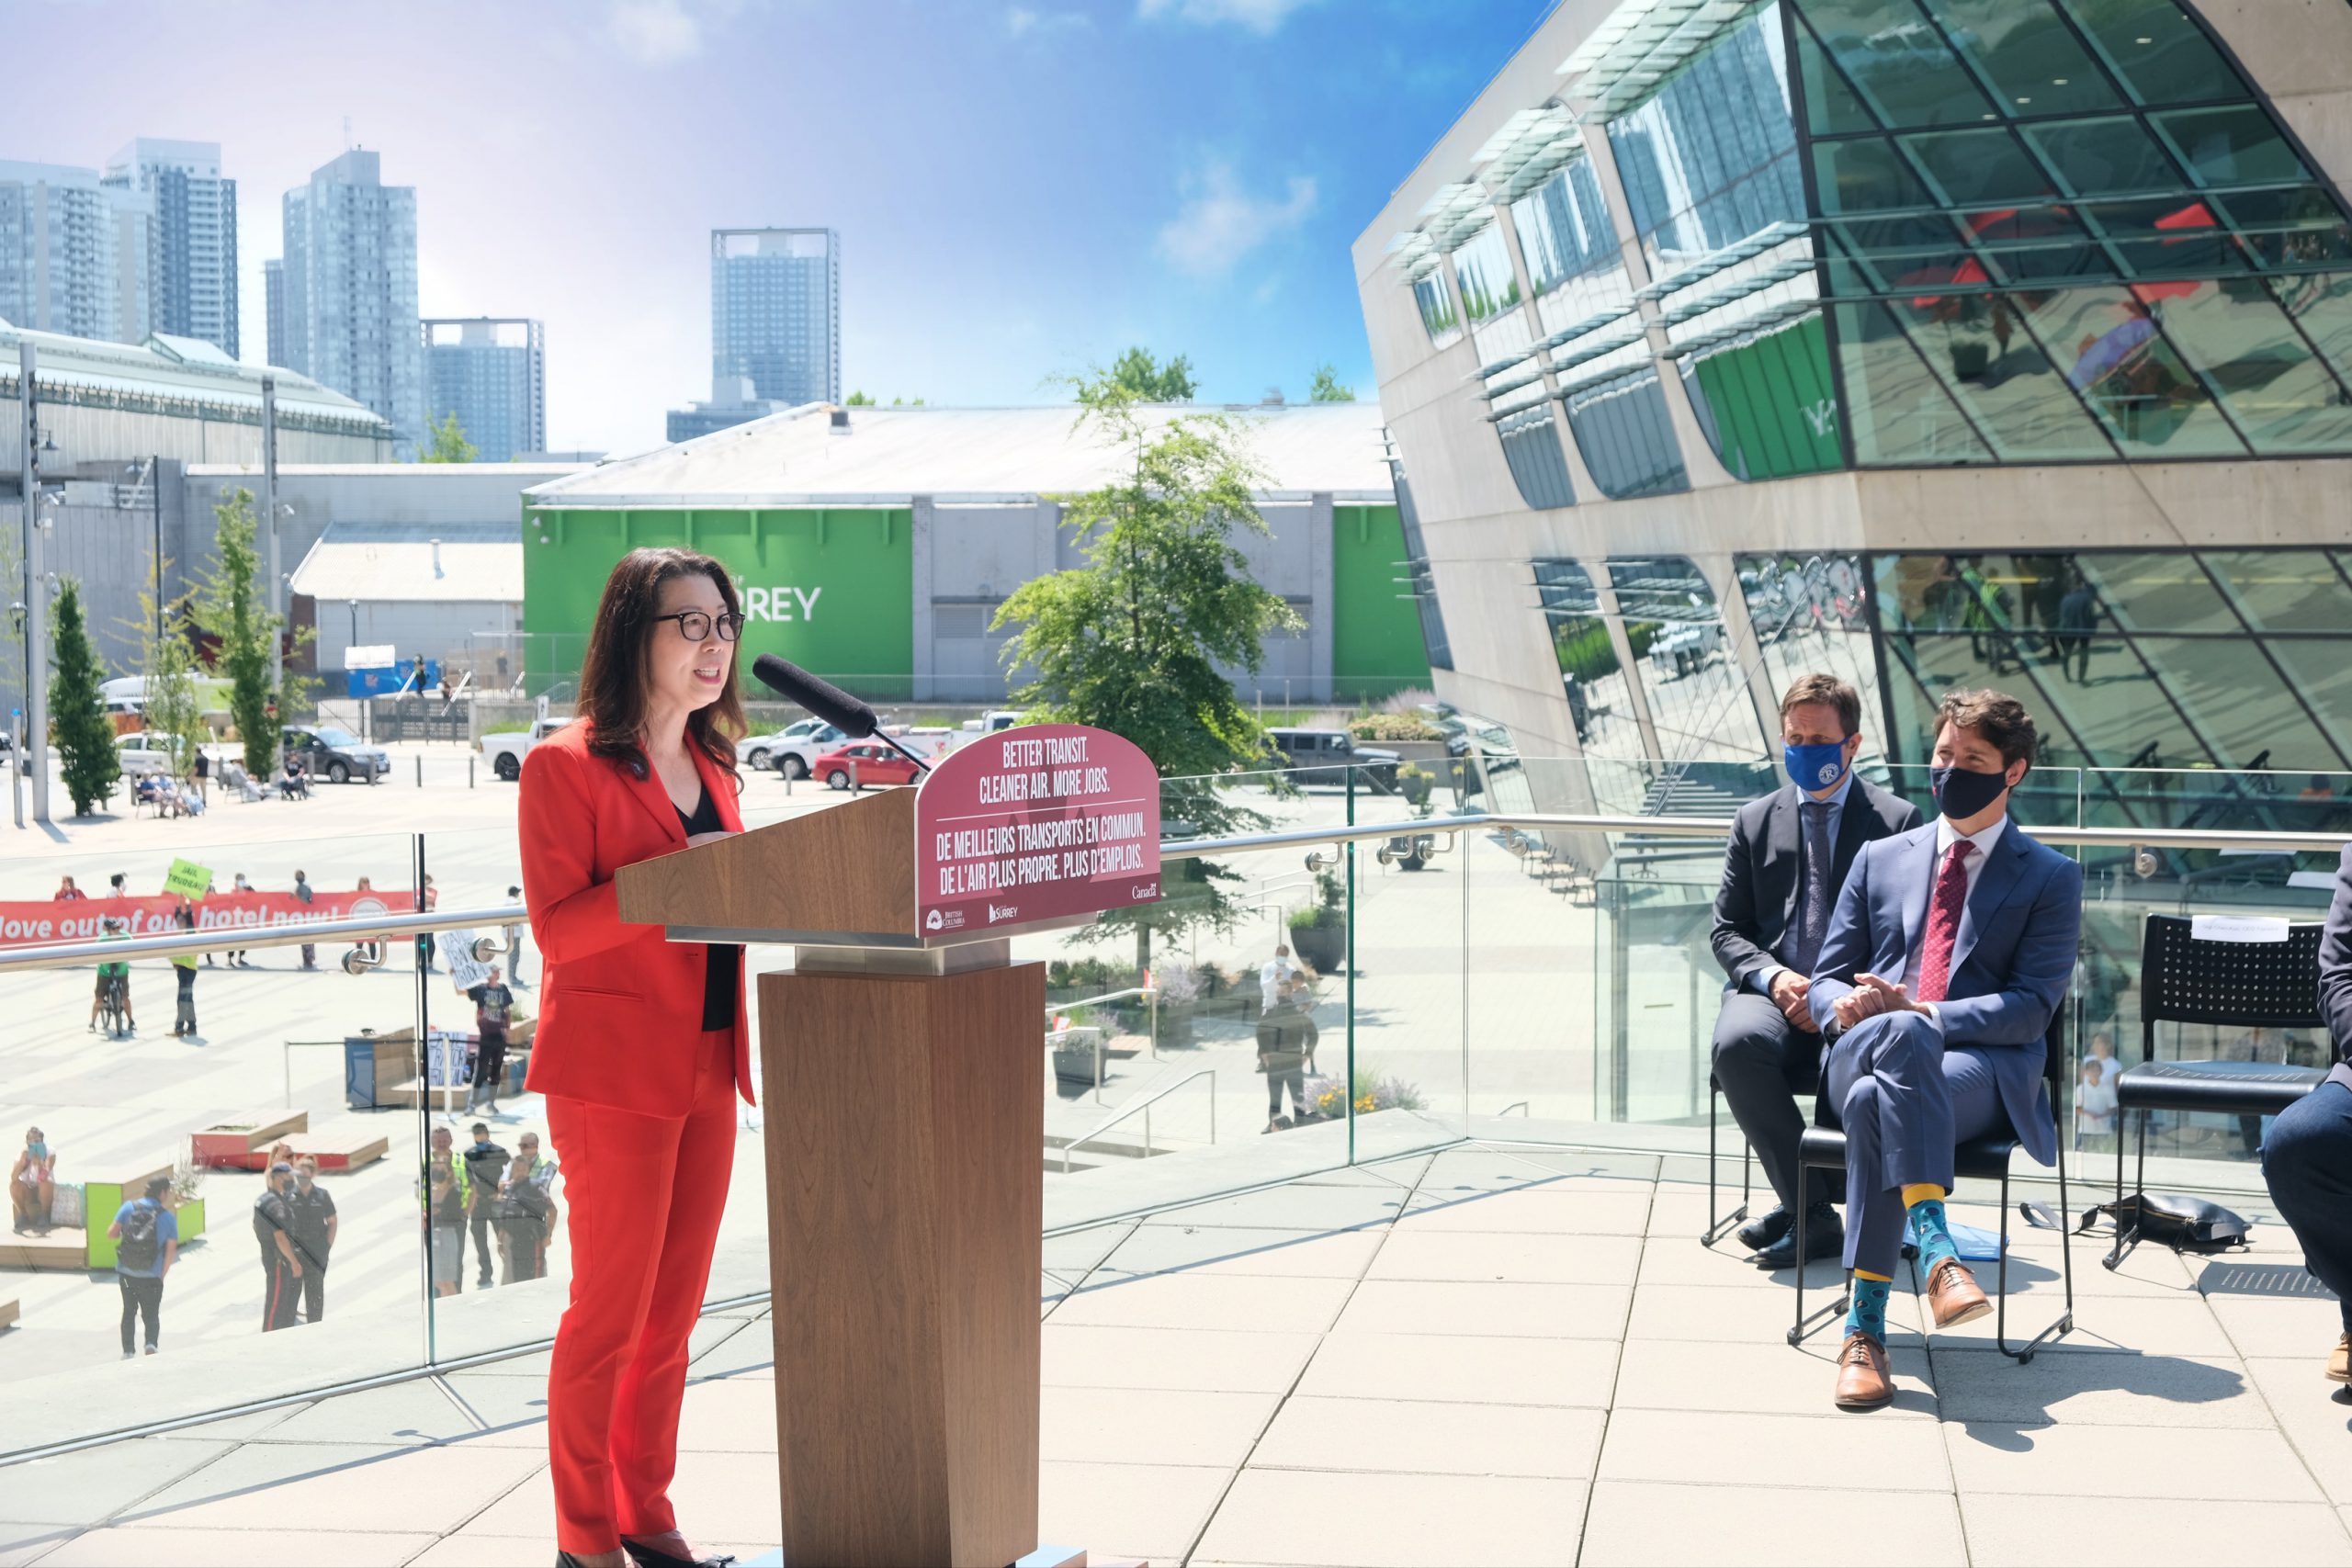 TransLink Interim CEO Gigi Chen-Kuo speaks at the funding announcement for the Surrey Langley SkyTrain project